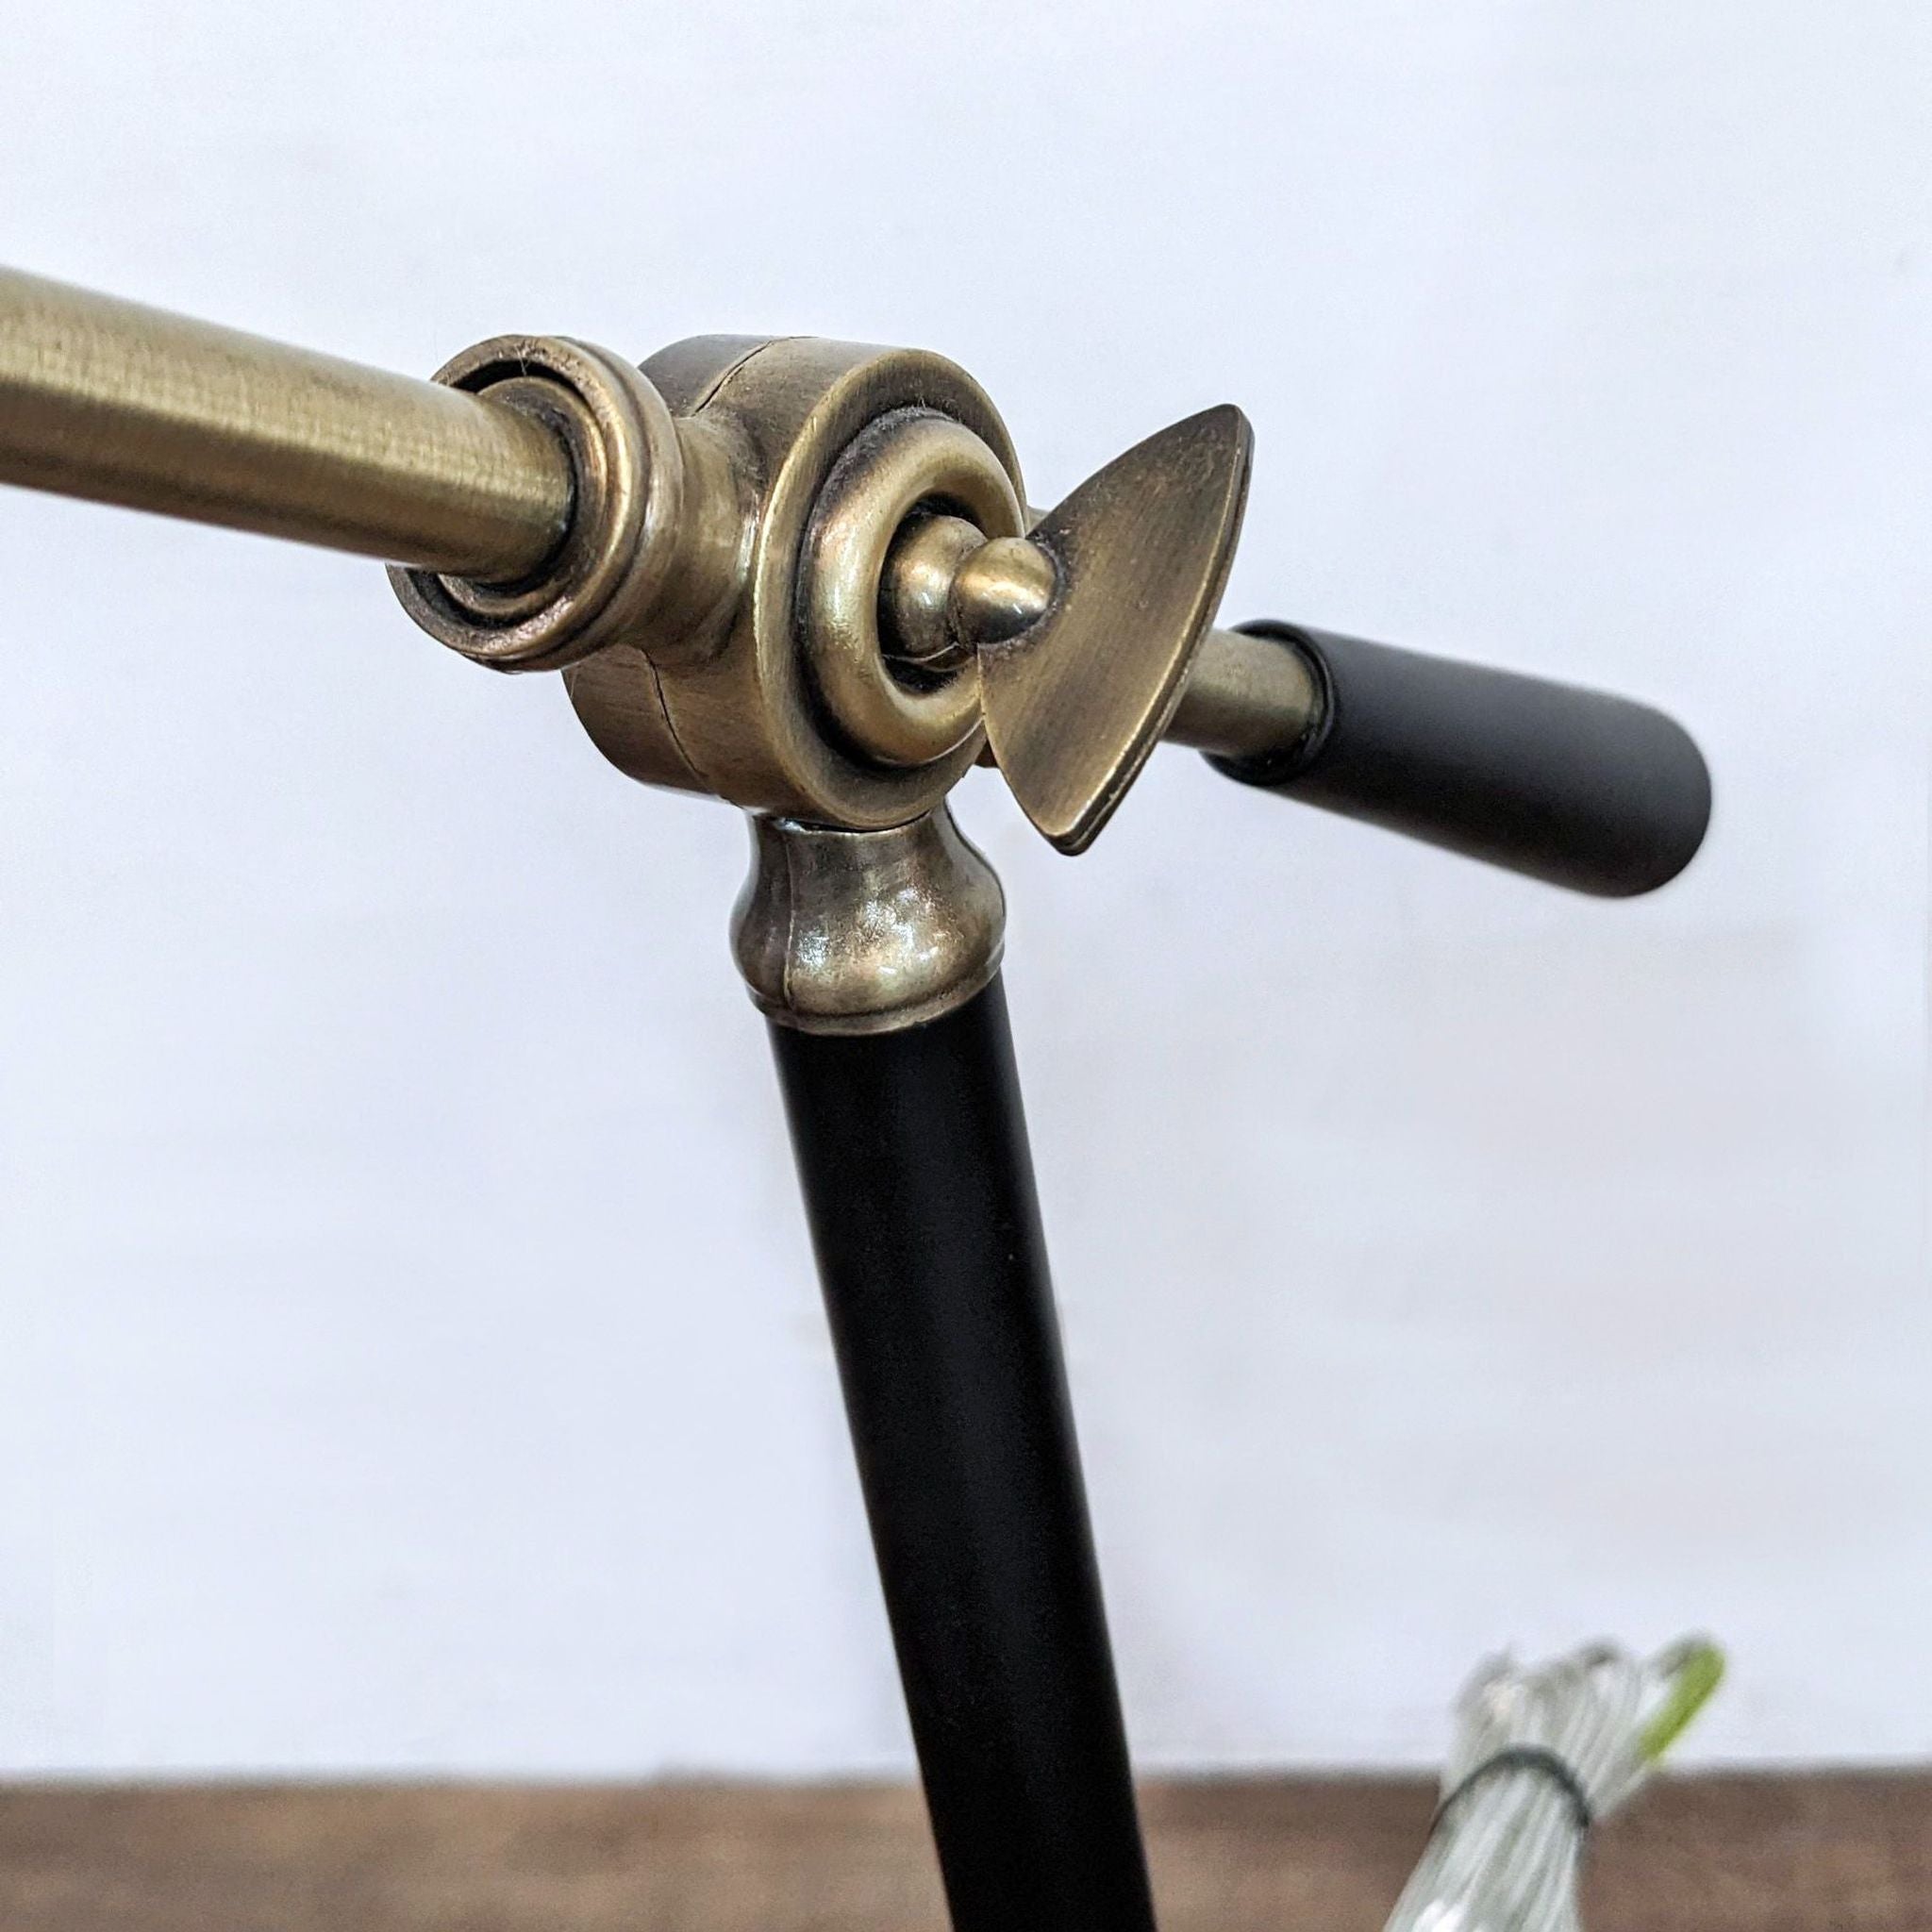 Close-up of a Reperch lighting fixture with an antique brass finish and black accents.